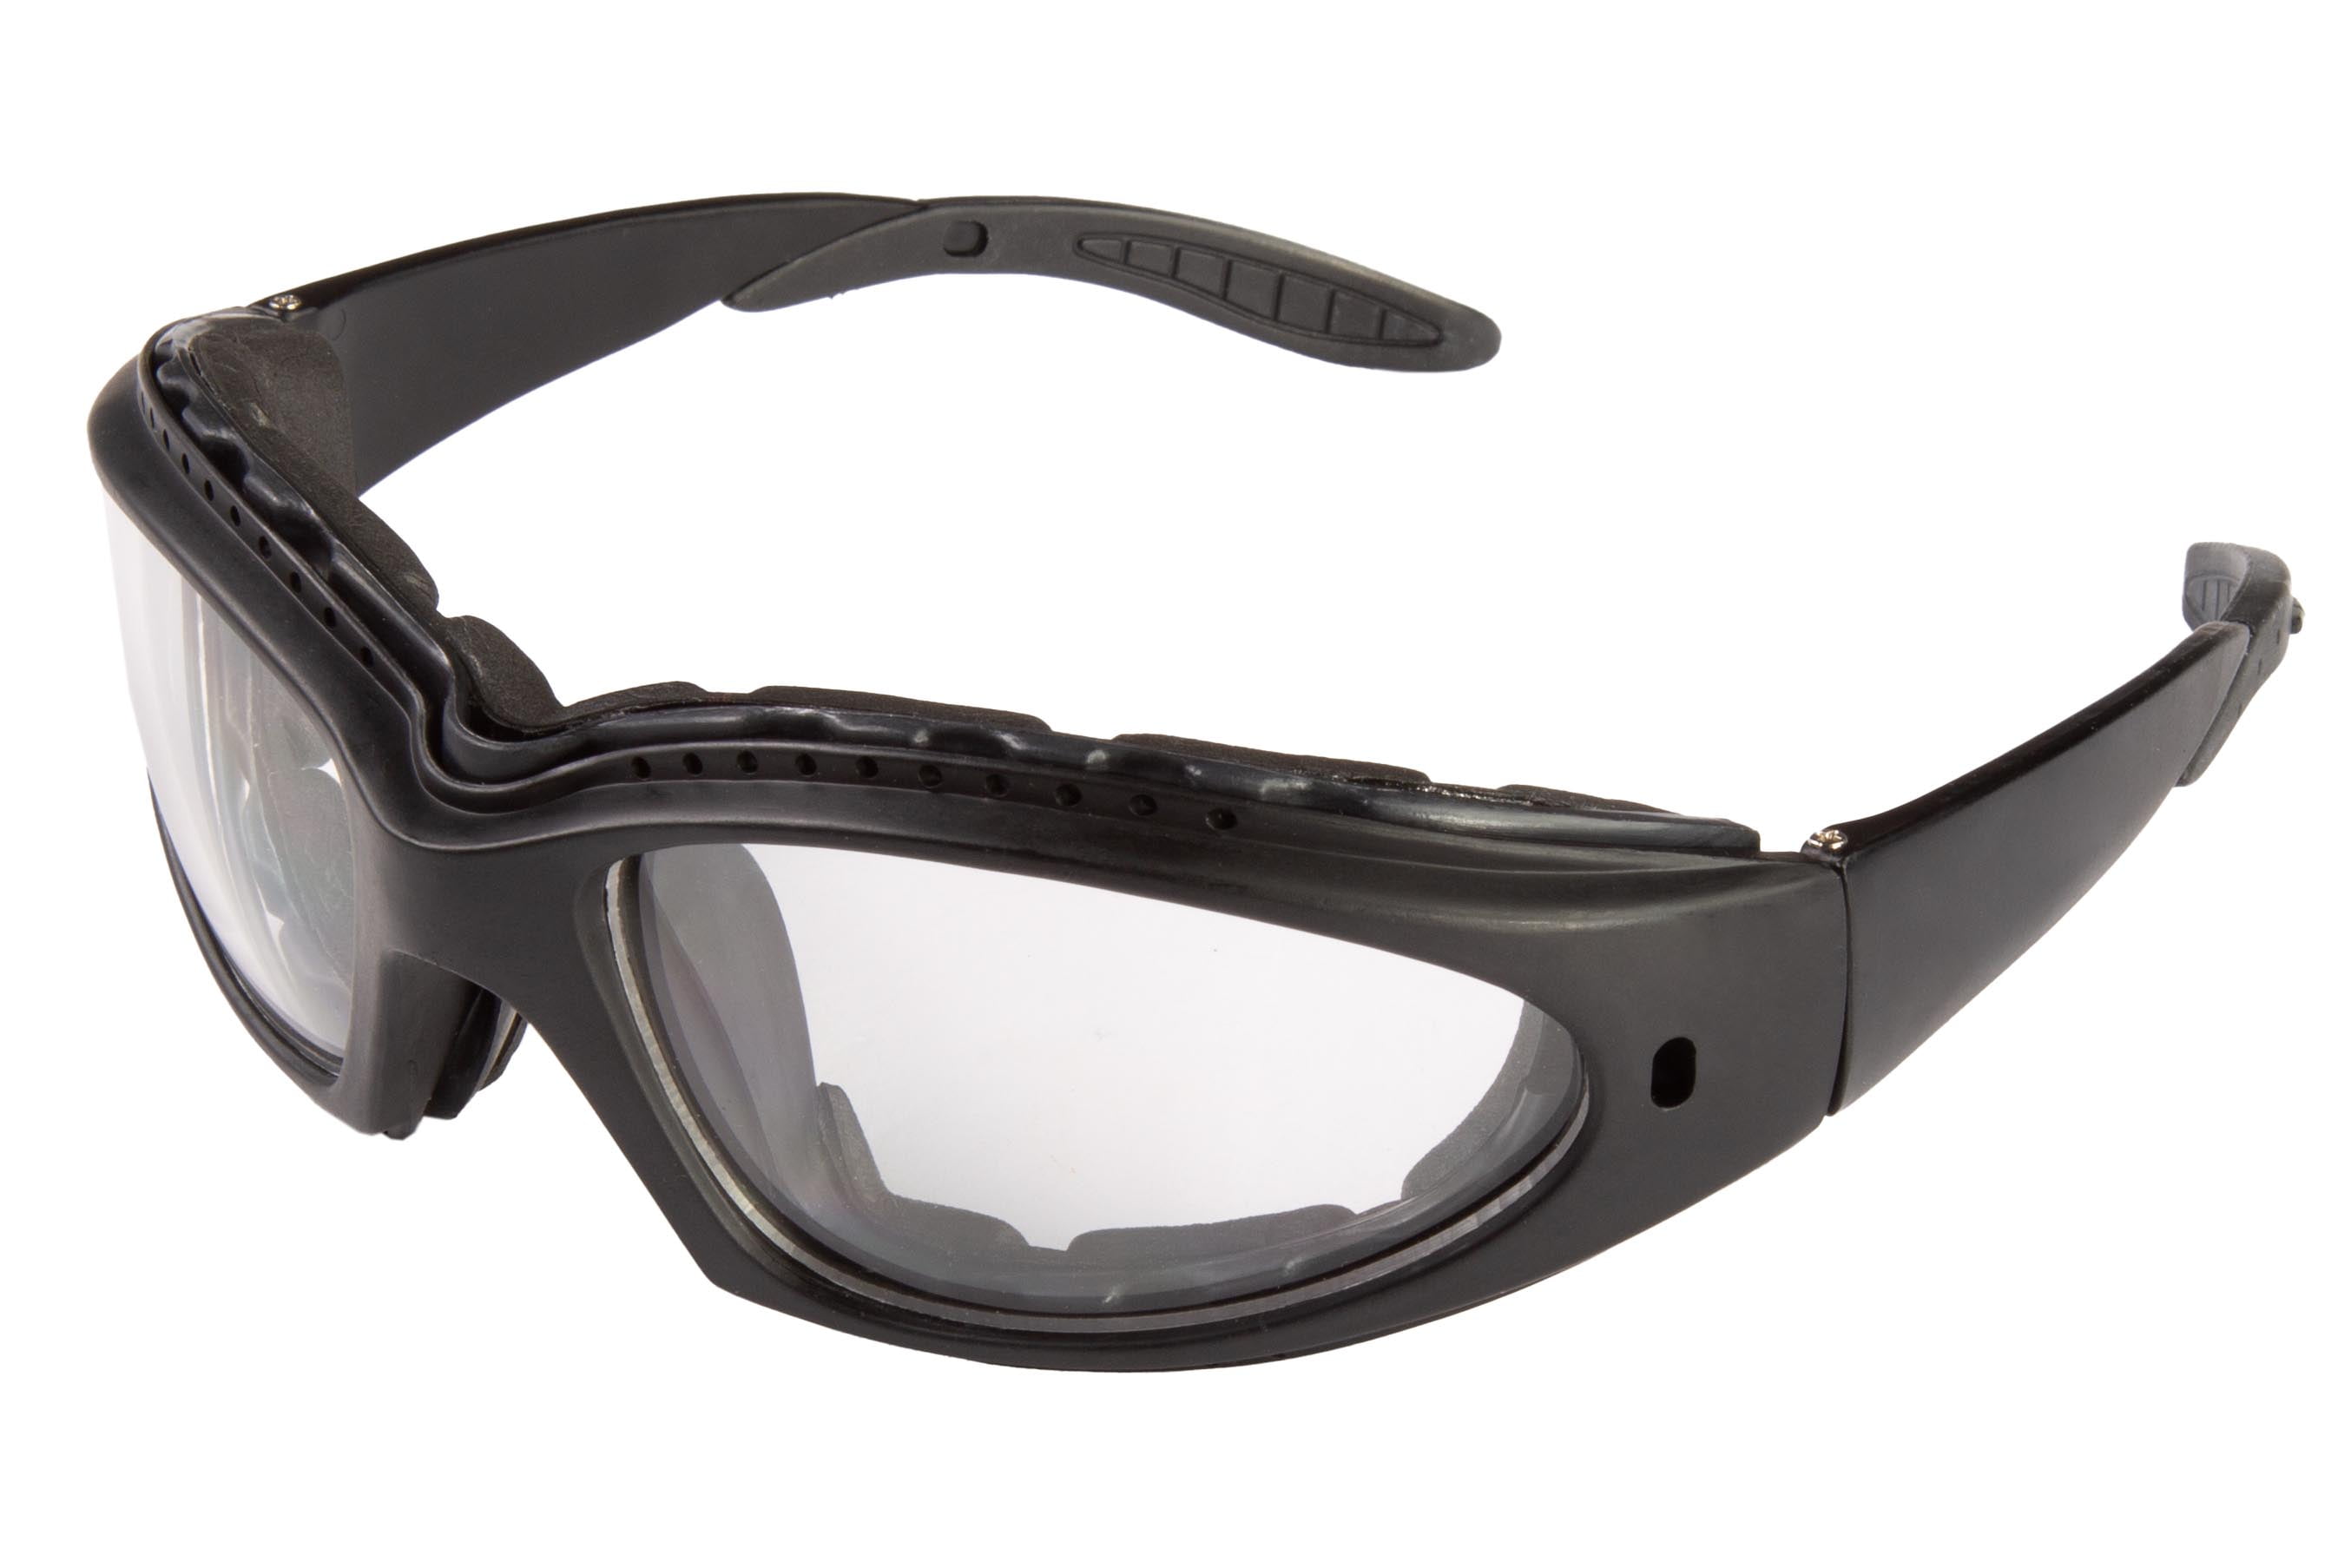 FUEL Adult MX ATV Off-Road Riding Glasses for Motorcycle Moped Cruiser Scooter - Black Frames - 100% UV Protection